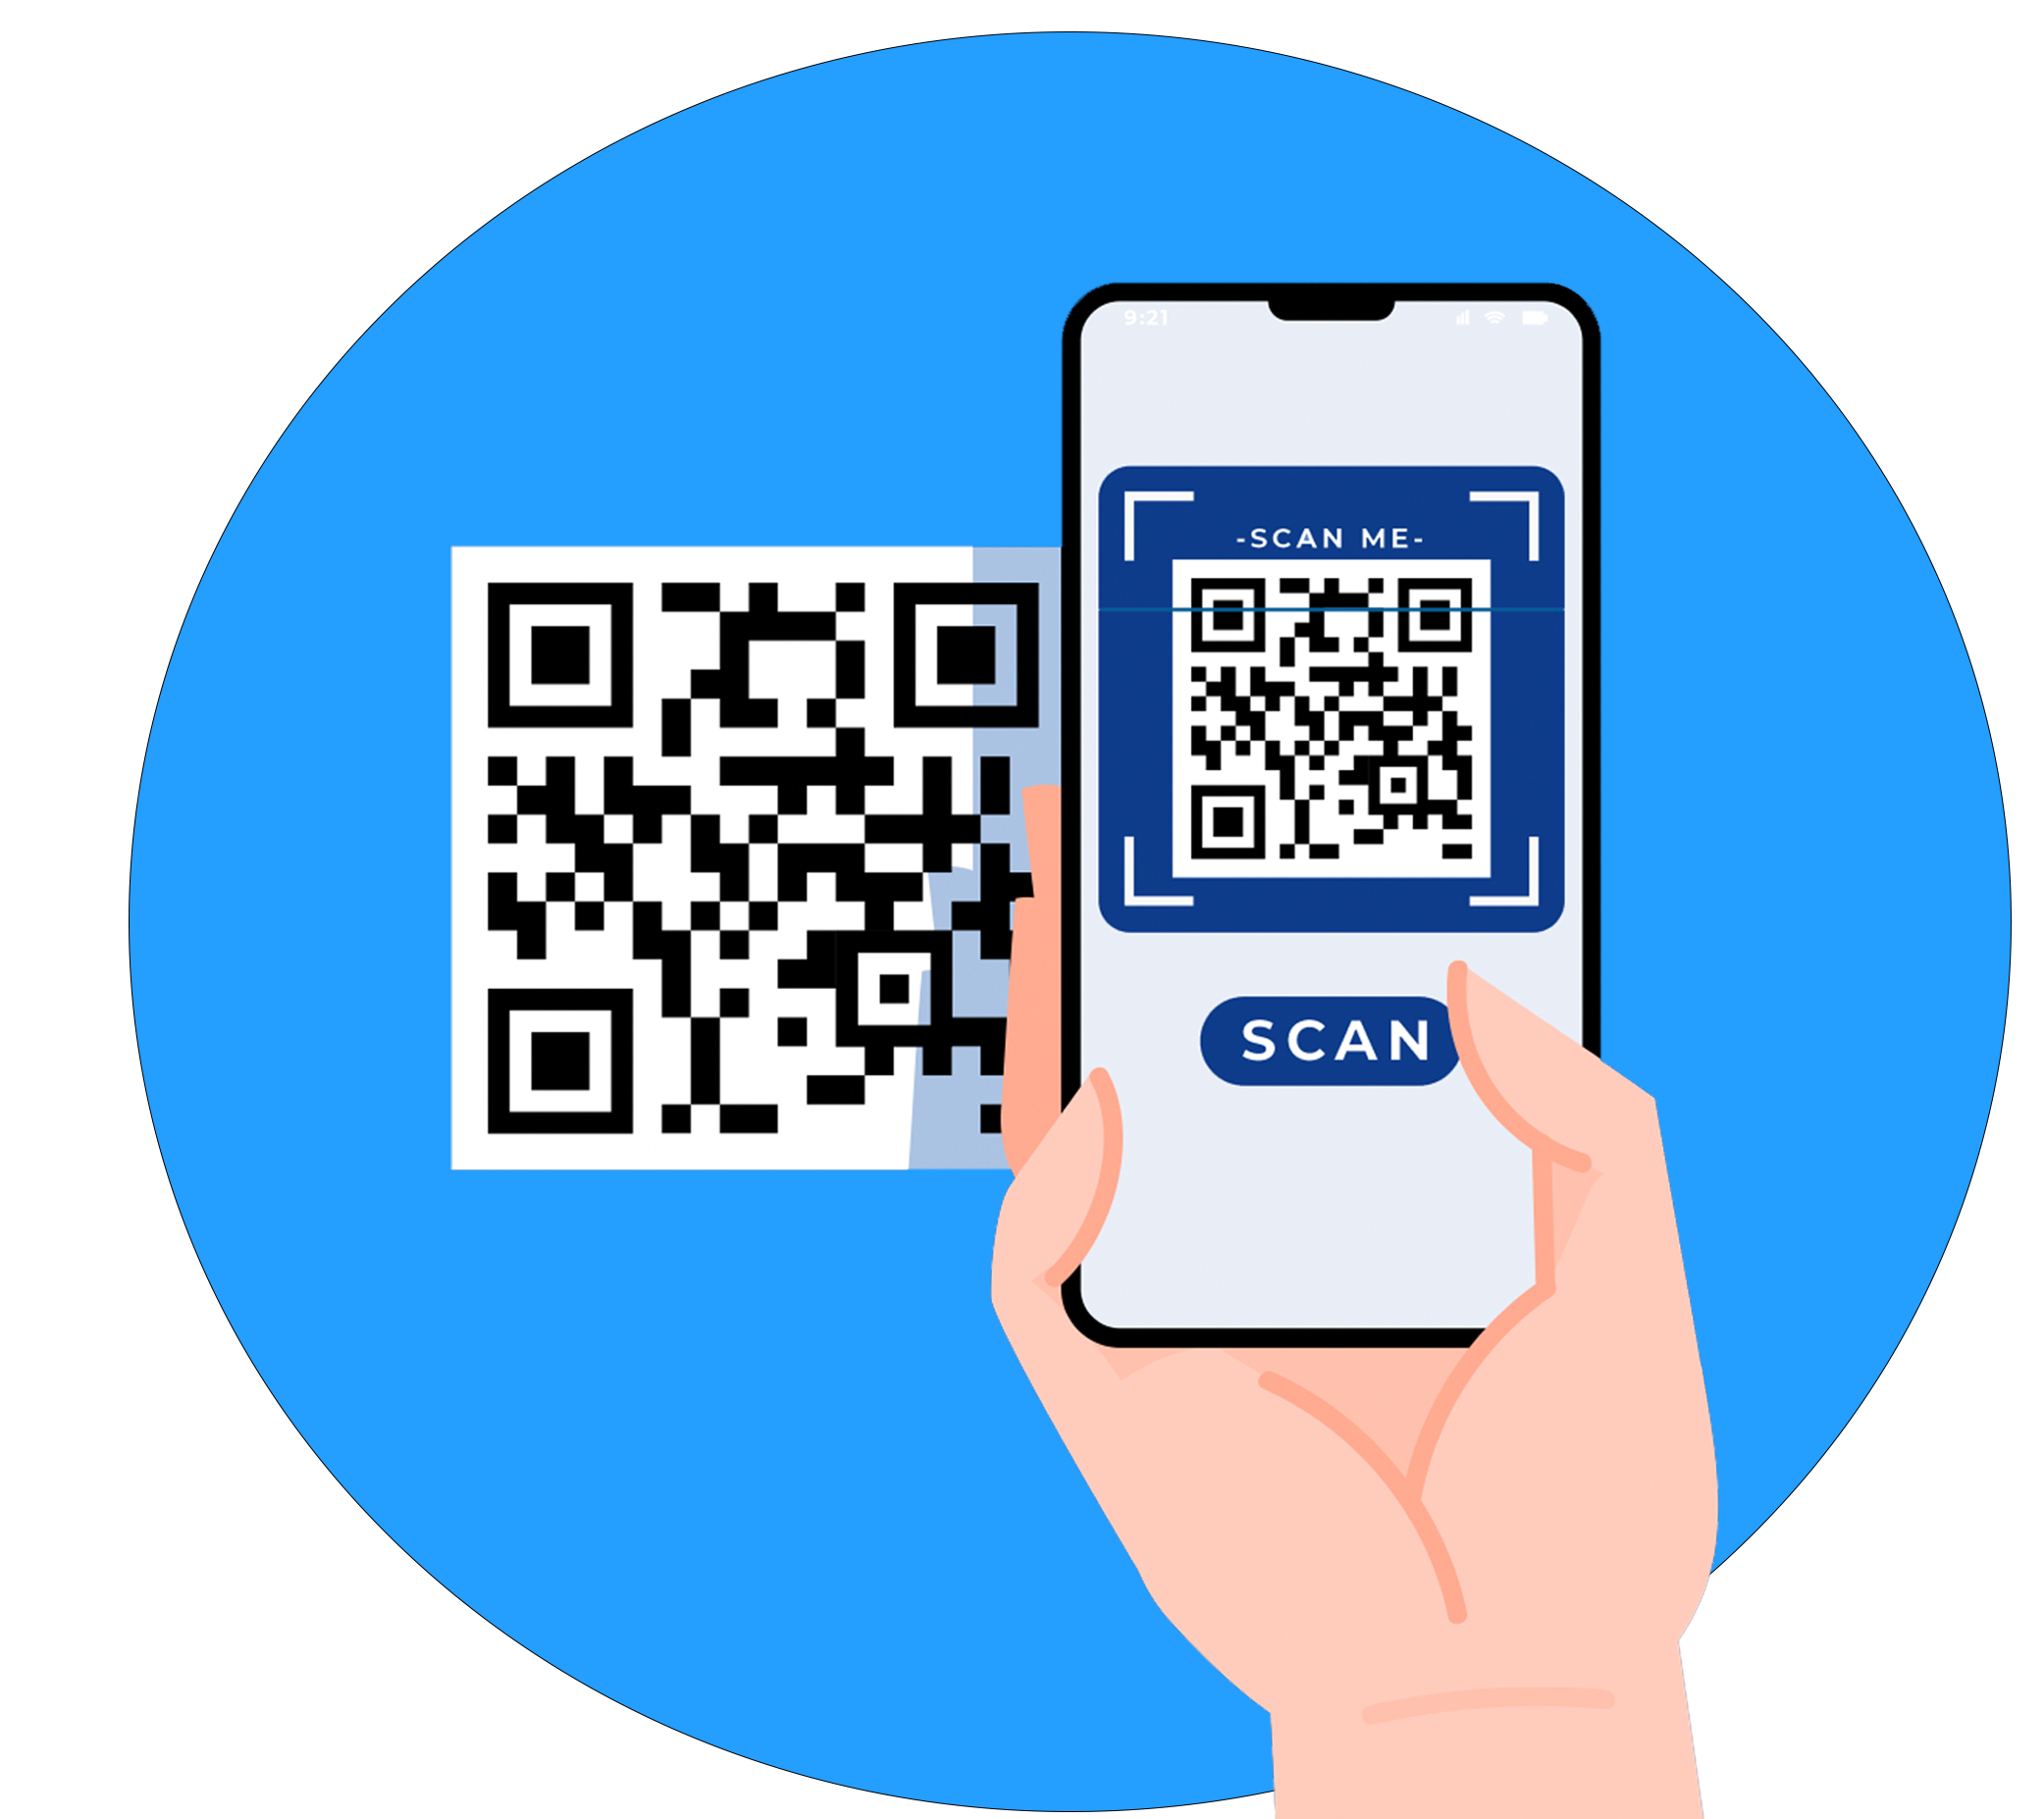 Scan the QR code.